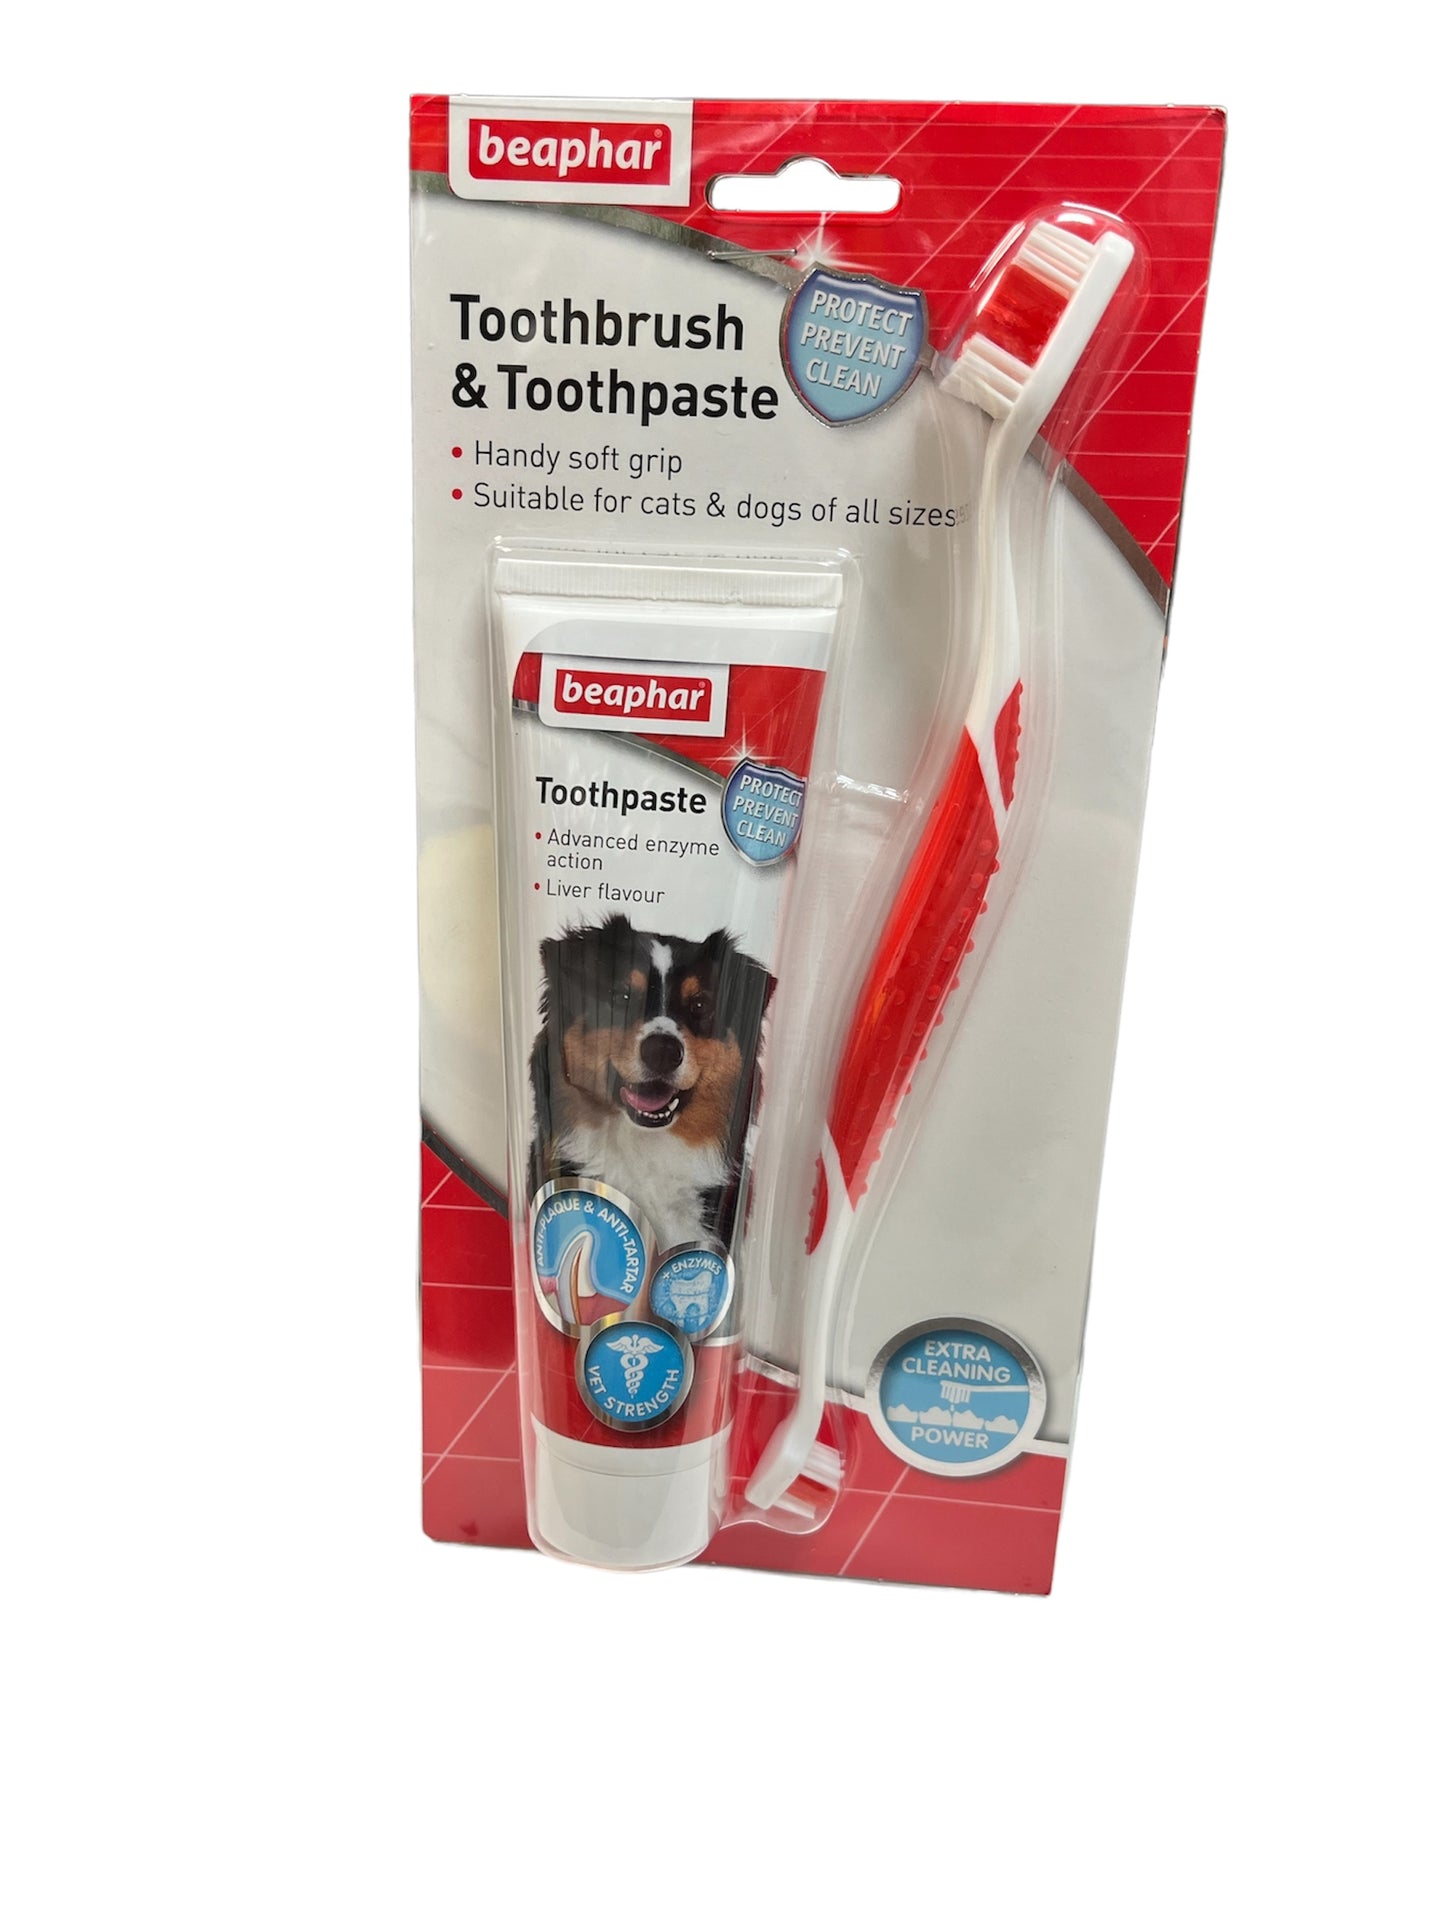 Beaphar Toothbrush and Toothpaste